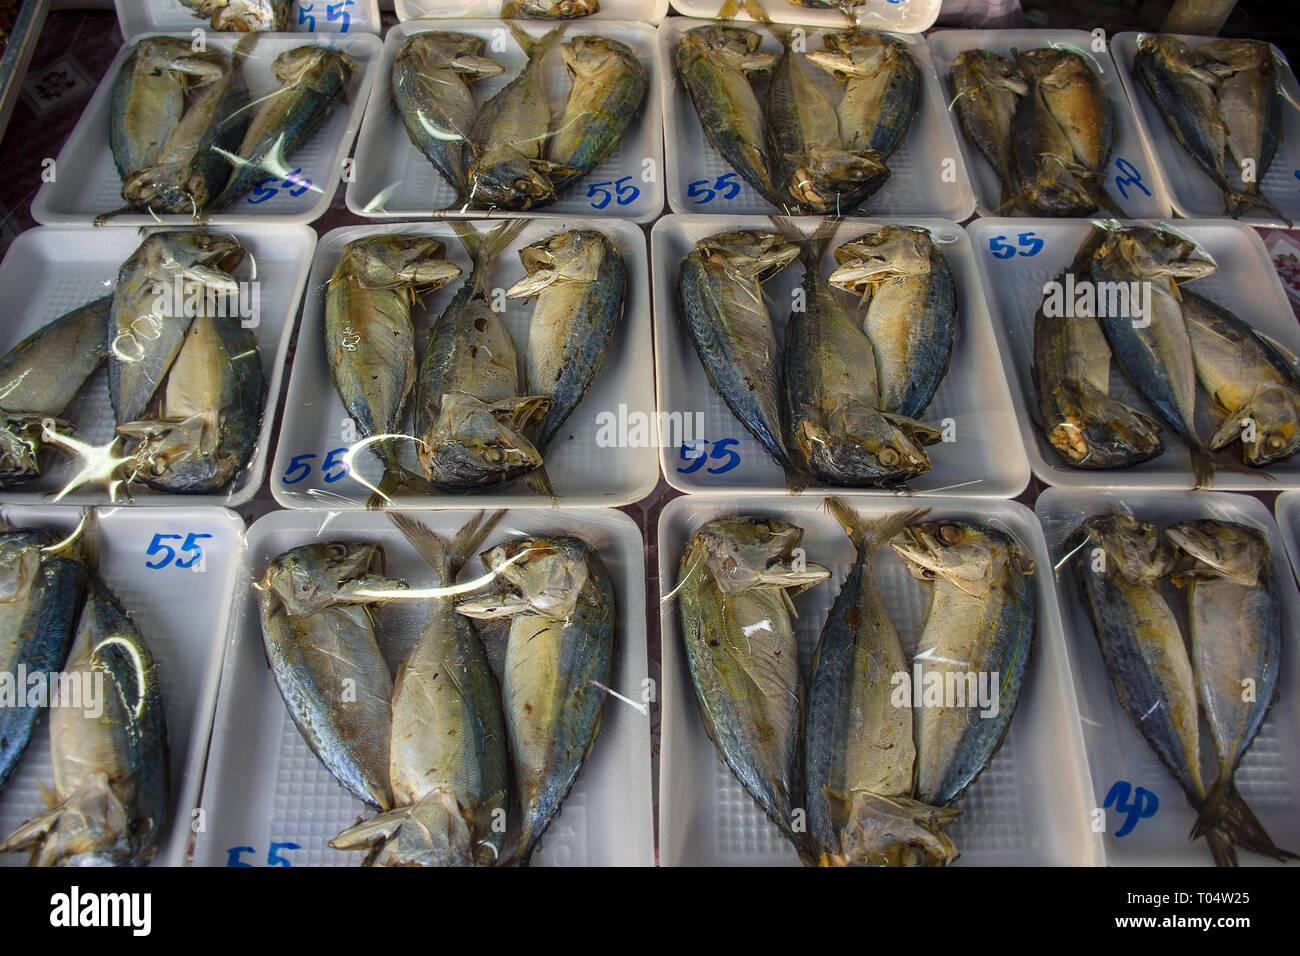 Dried fish packaged and on display for sale on a market stall. Stock Photo